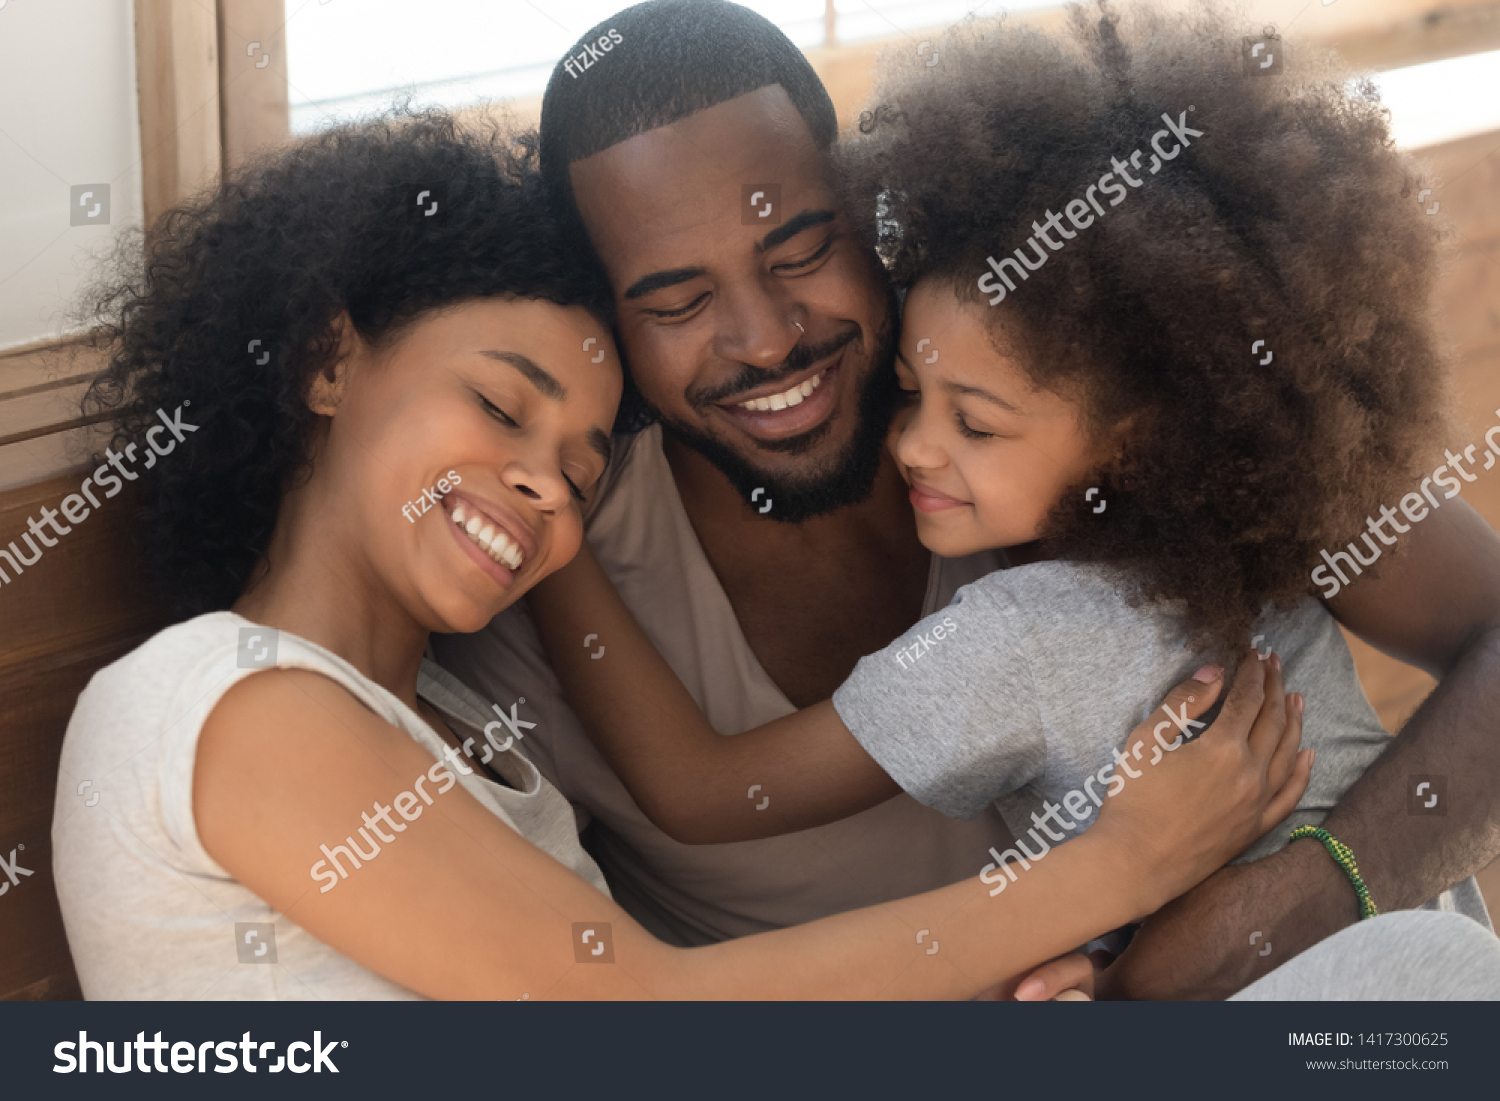 Happy affectionate african american family of three bonding embracing, cute kid child daughter and loving parents cuddling congratulating dad with fathers day hugging smiling daddy laughing together #1417300625